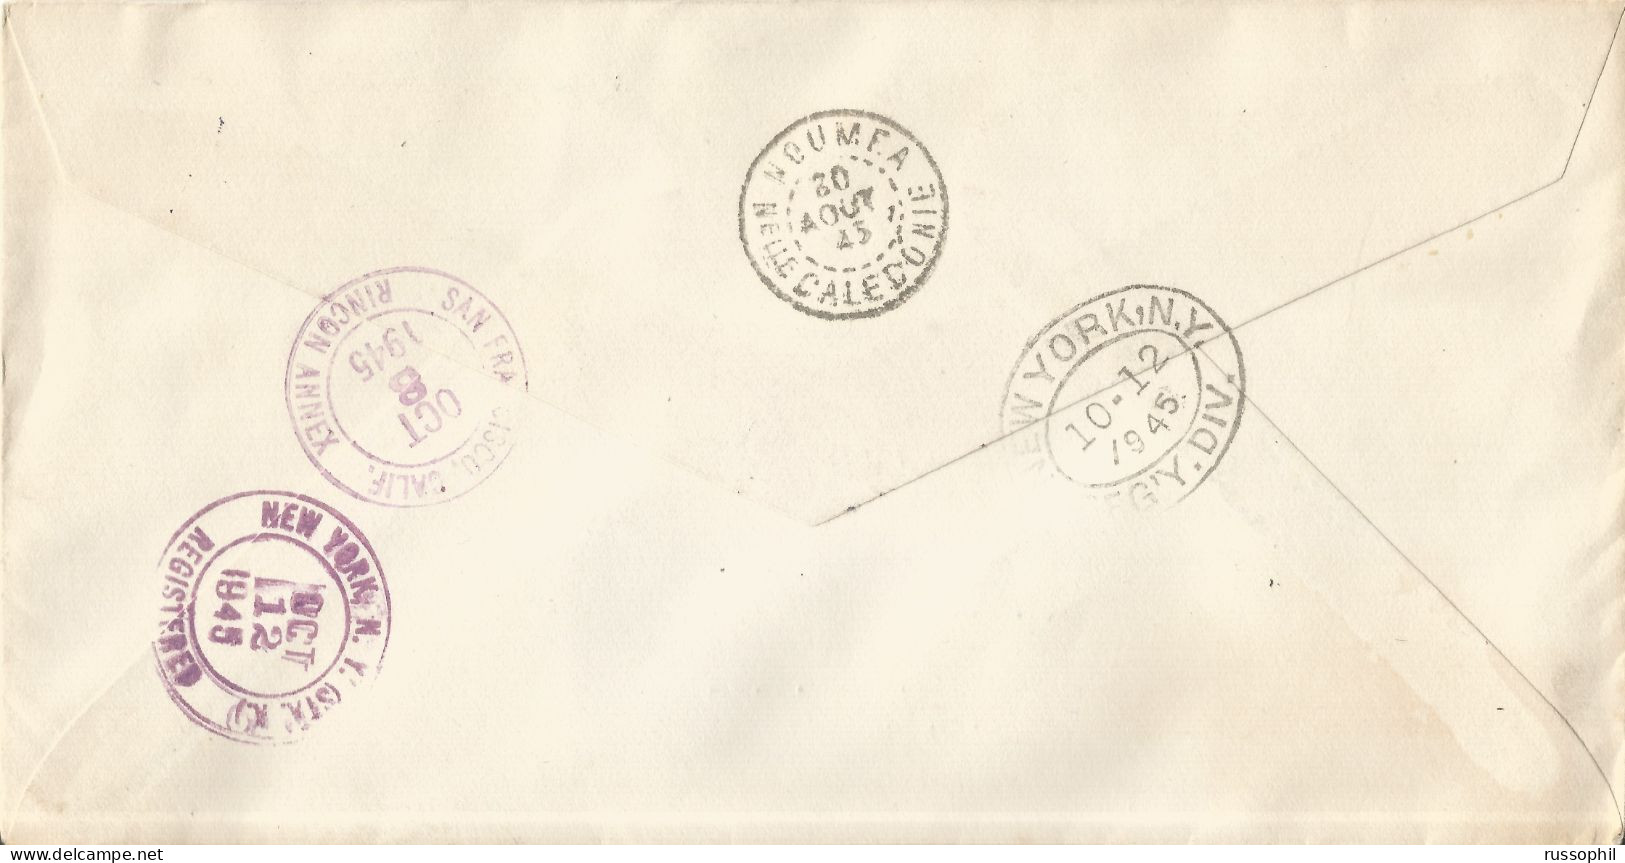 WALLIS AND FUTUNA - 7 STAMP 26 FR FRANKING "LONDON" ISSUE ON REGISTERED COVER TO THE USA - 1945 - Brieven En Documenten